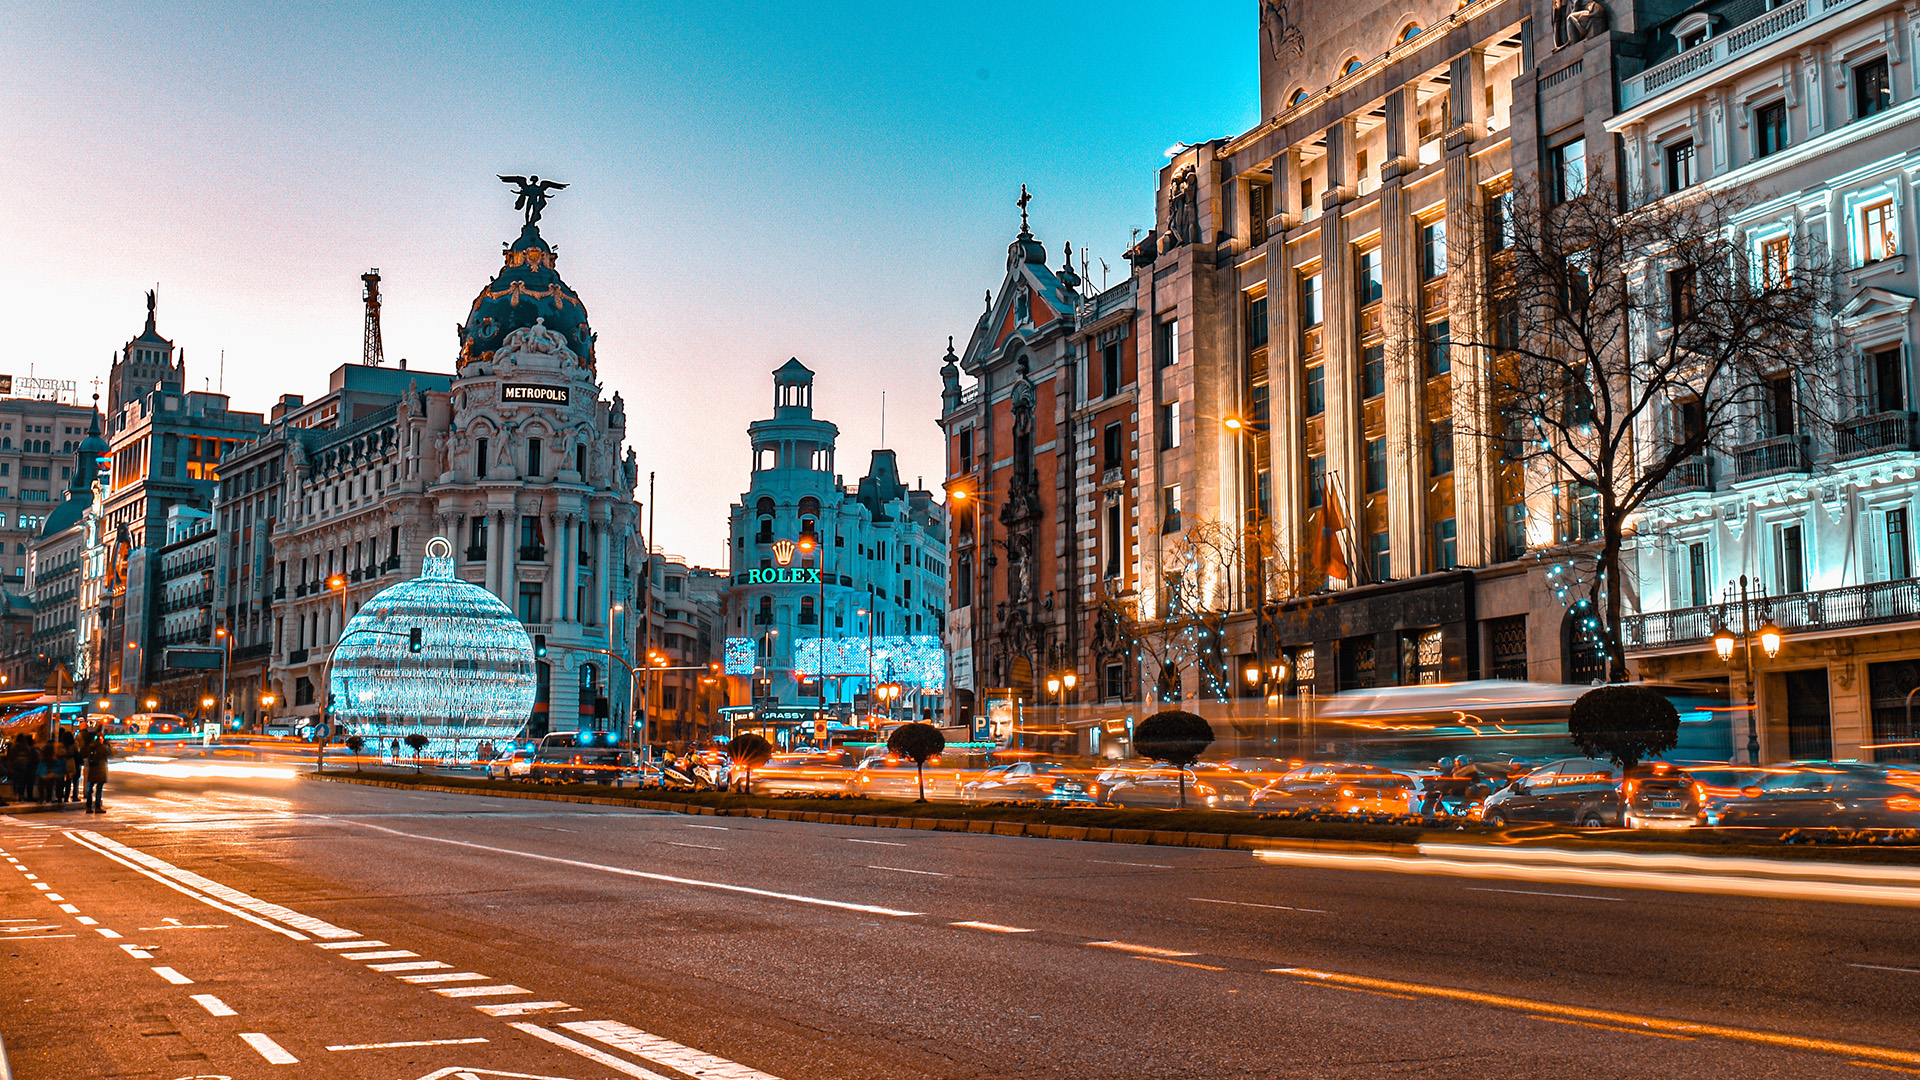 SJU and Iberia unite to offer direct flights to Madrid